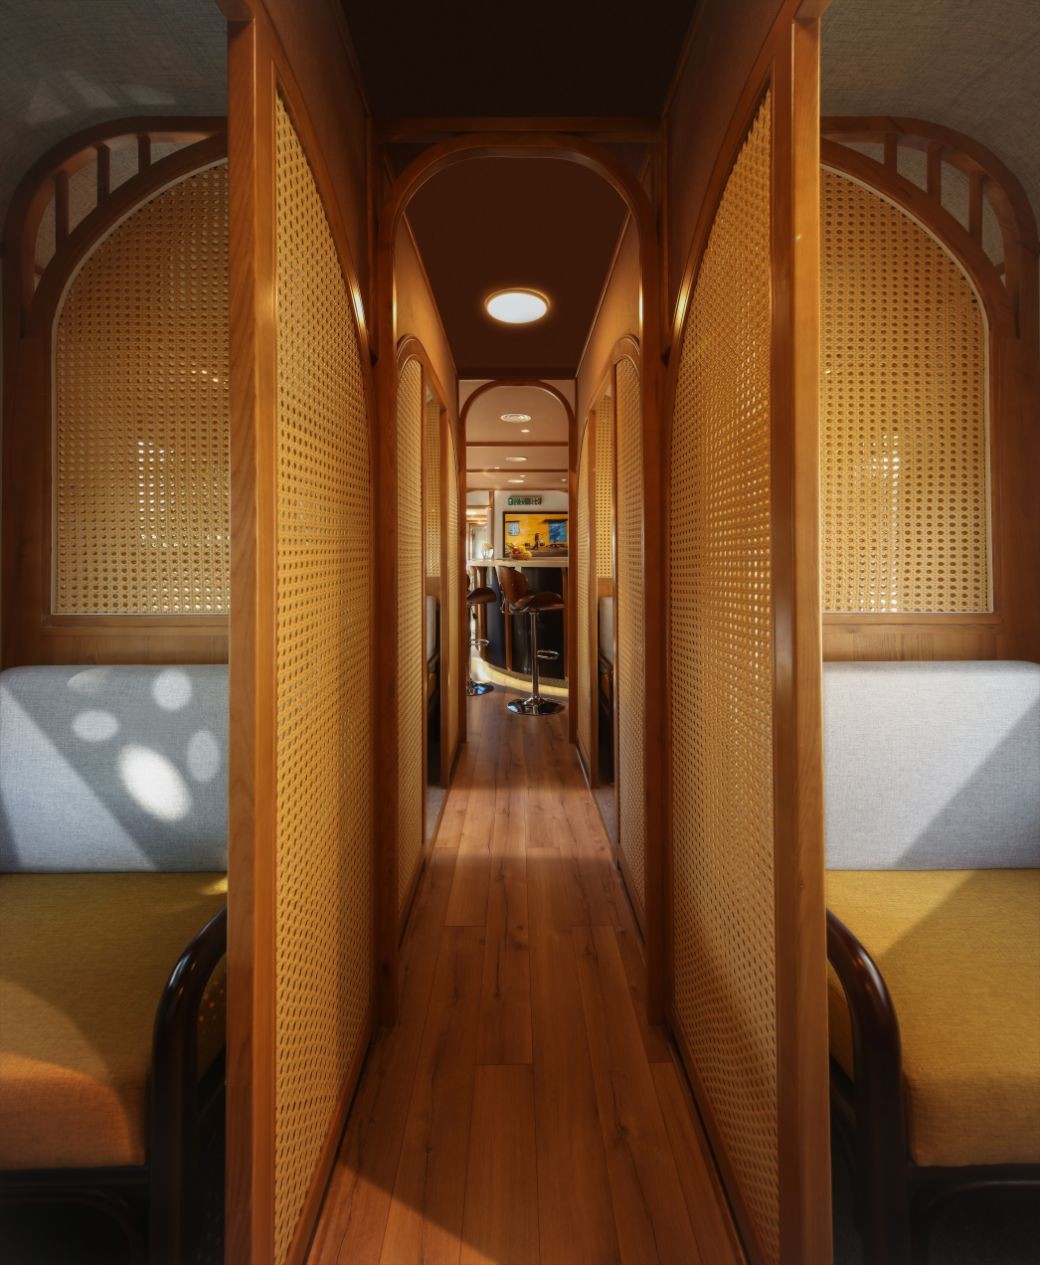 Luxury wooden interiors in the carriage. Photo: The Vietage